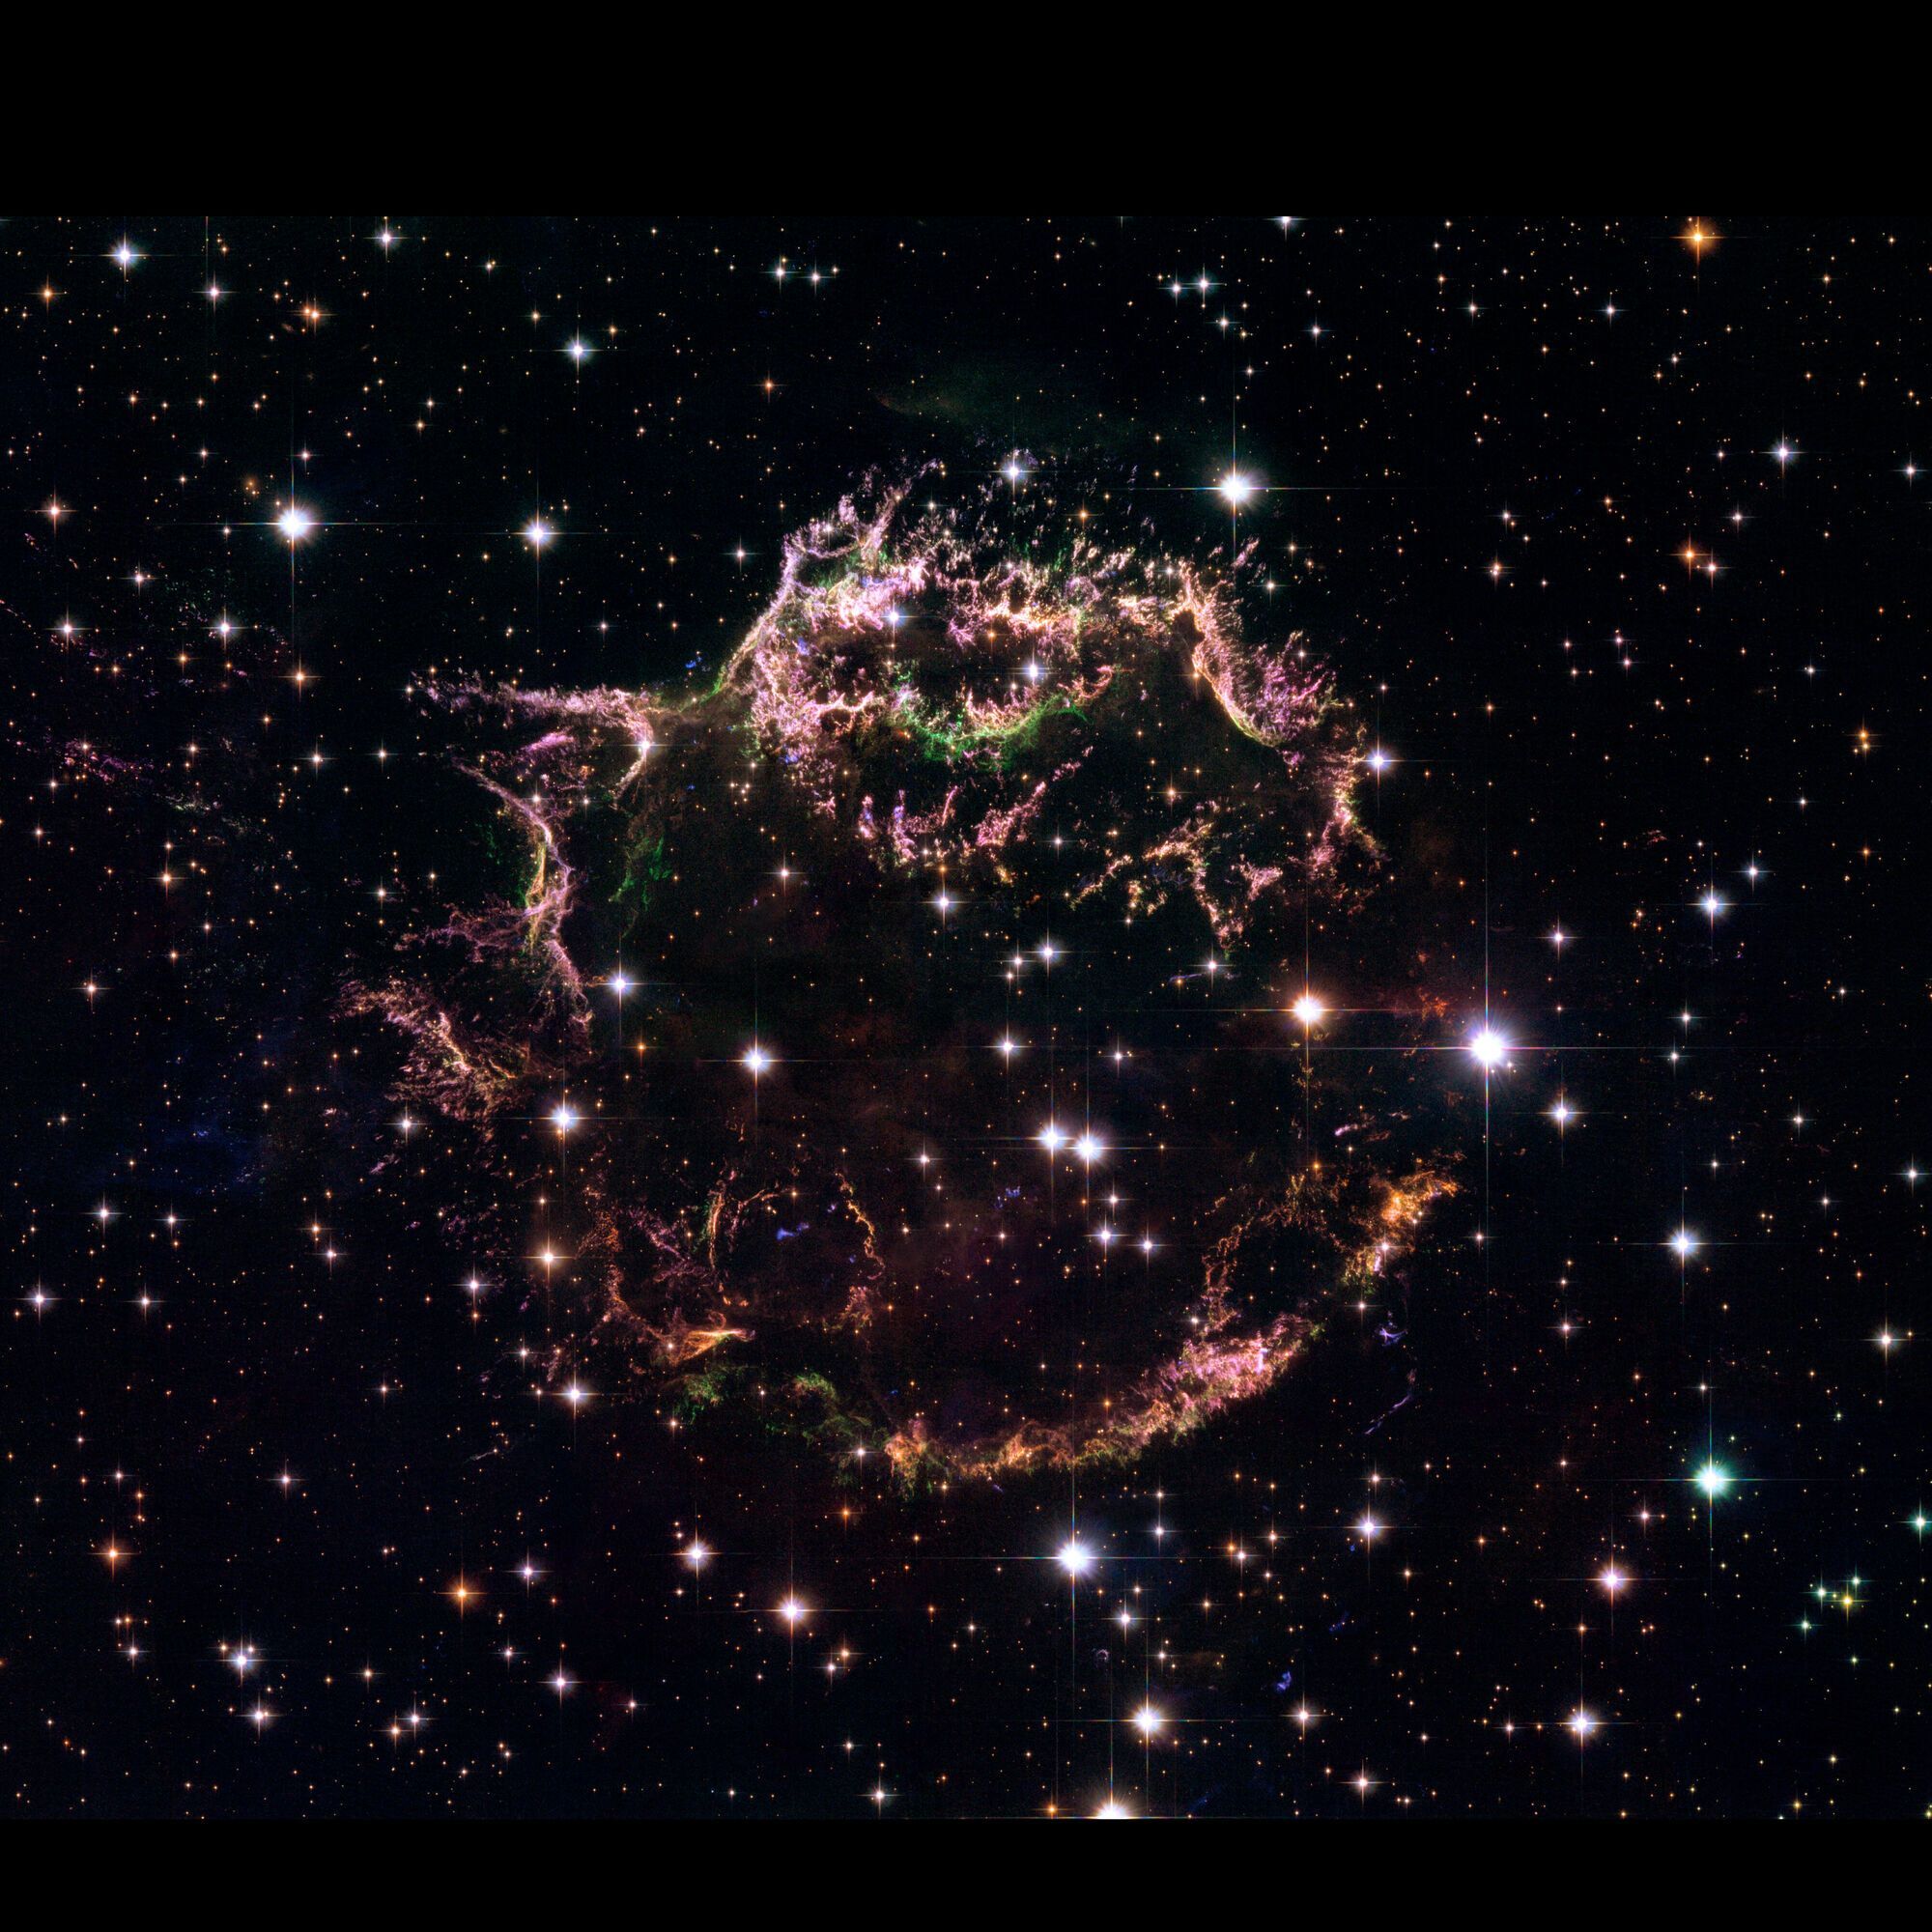 Supernova Cassiopeia A by the Hubble telescope in 2004